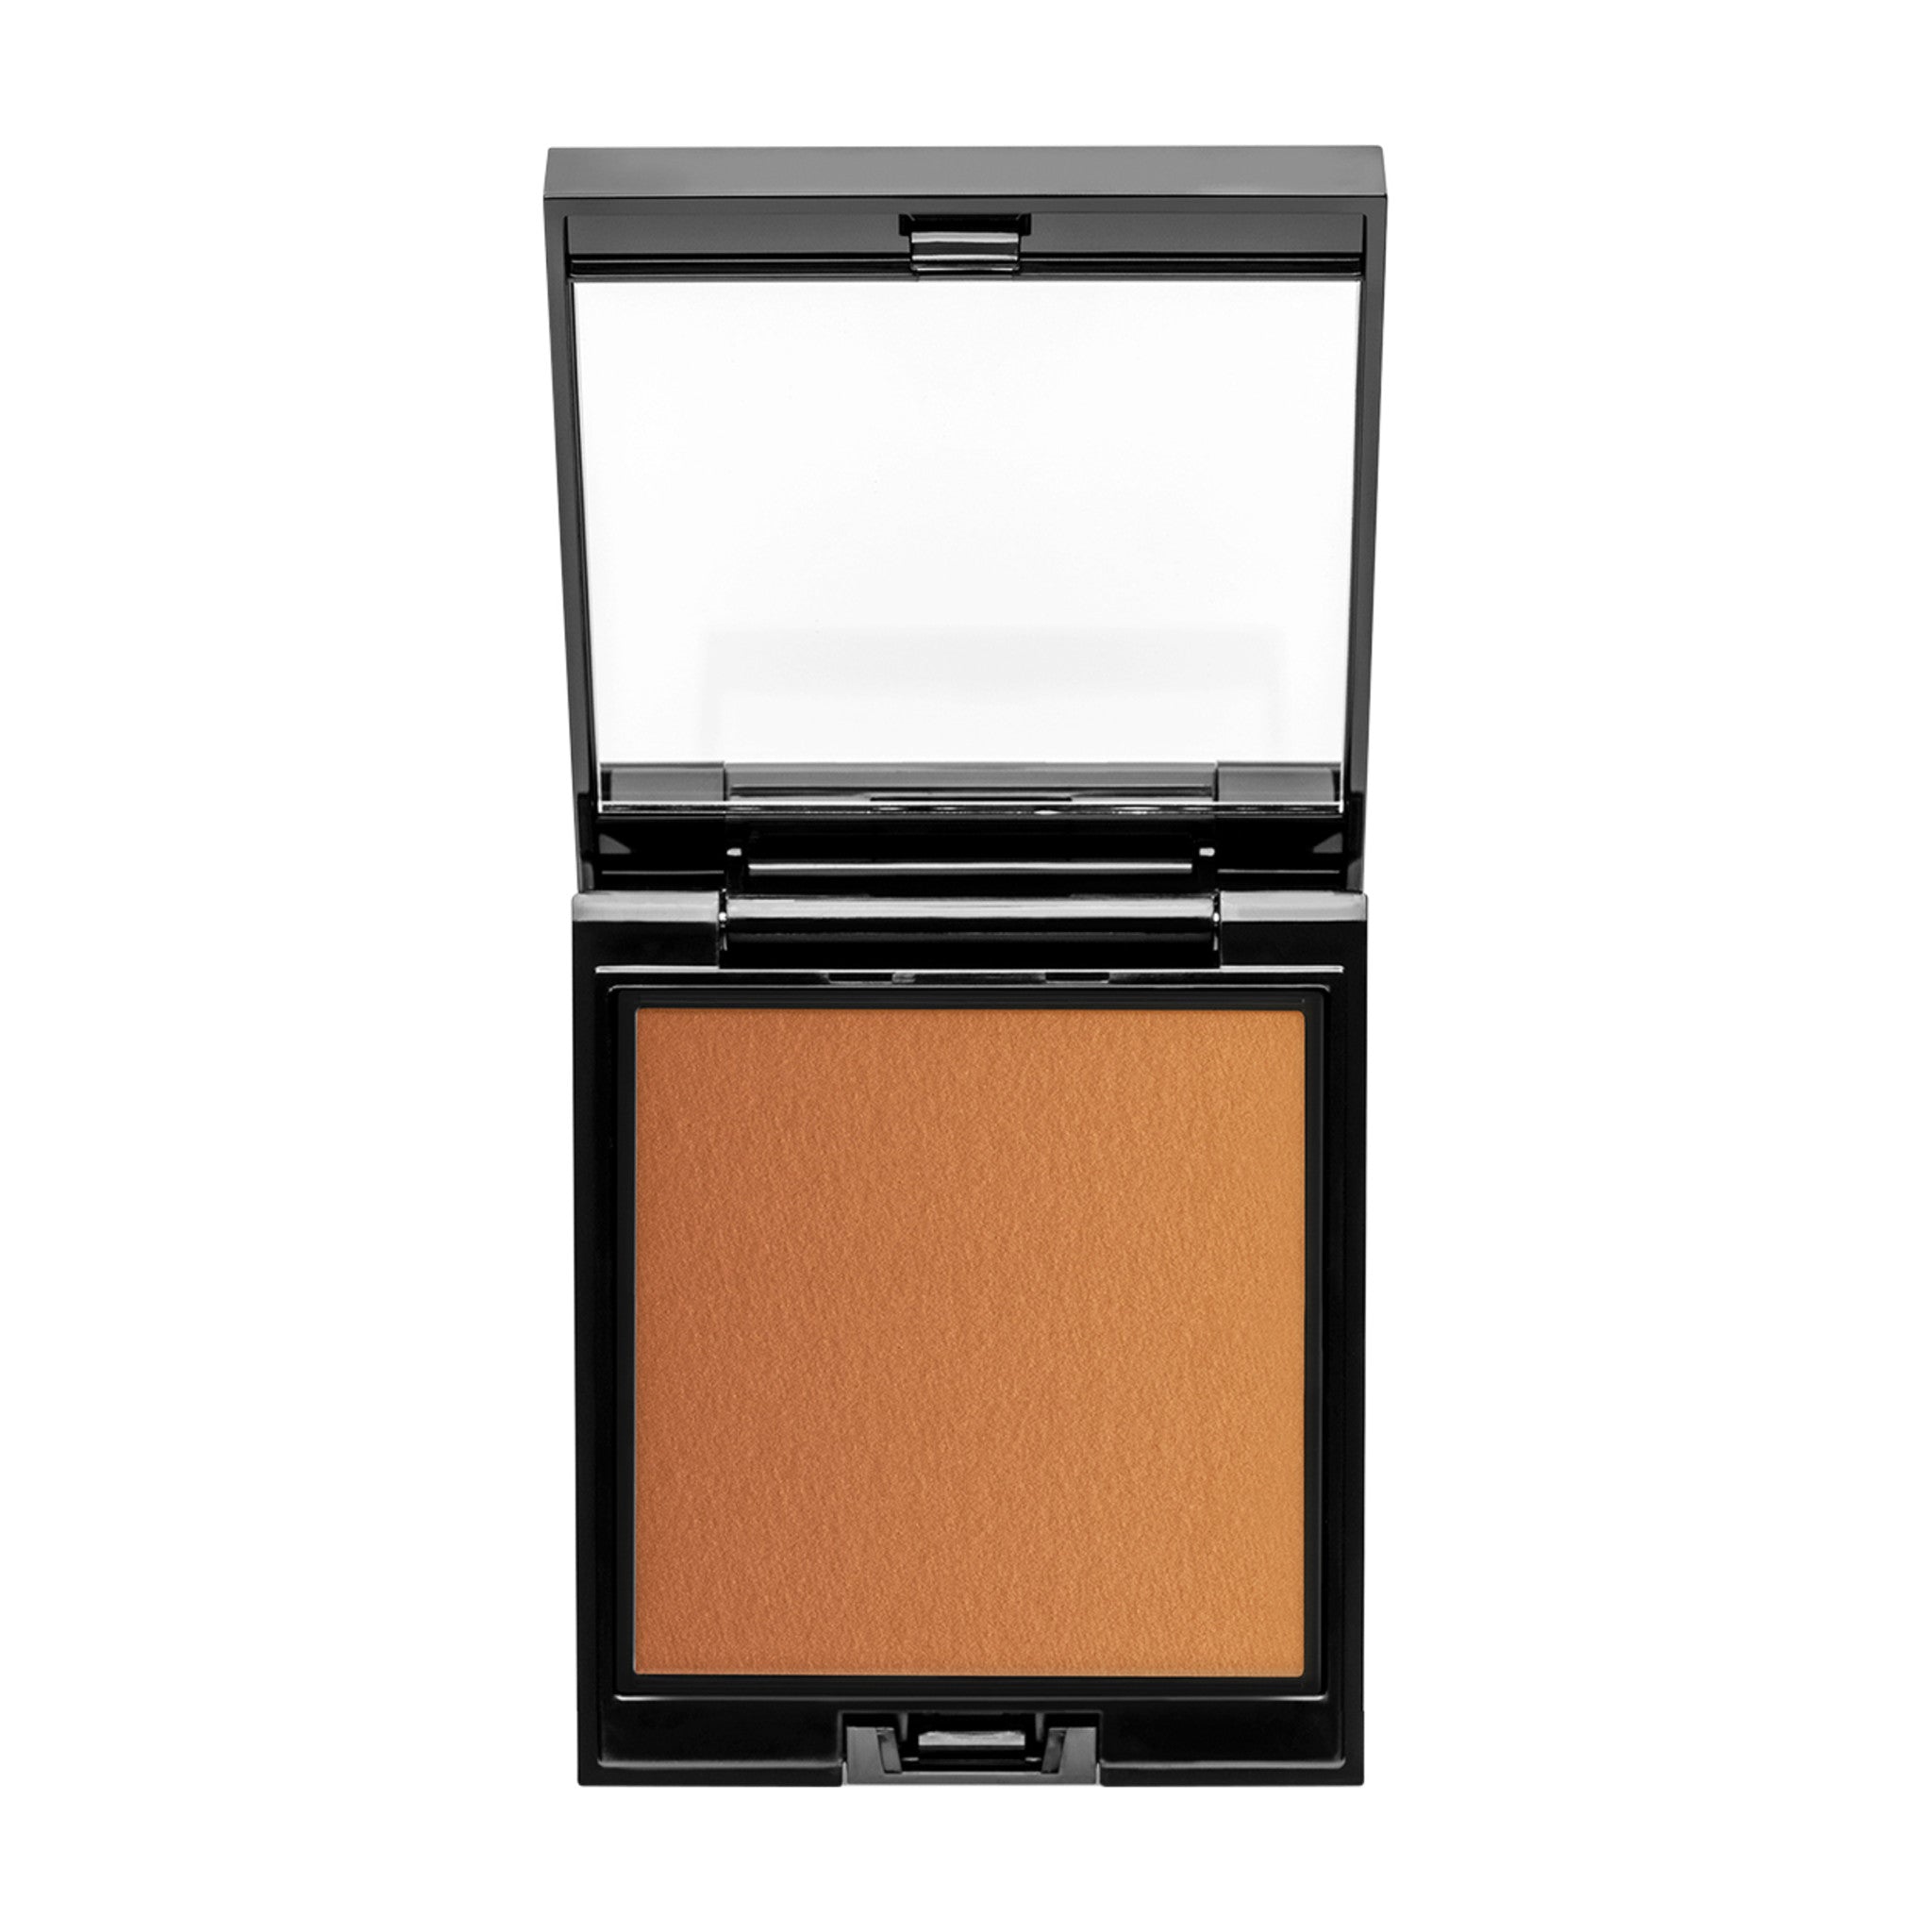 Surratt Artistique Bronzer Prefilled Compact Color/Shade variant: Soleil Doux main image. This product is in the color brown